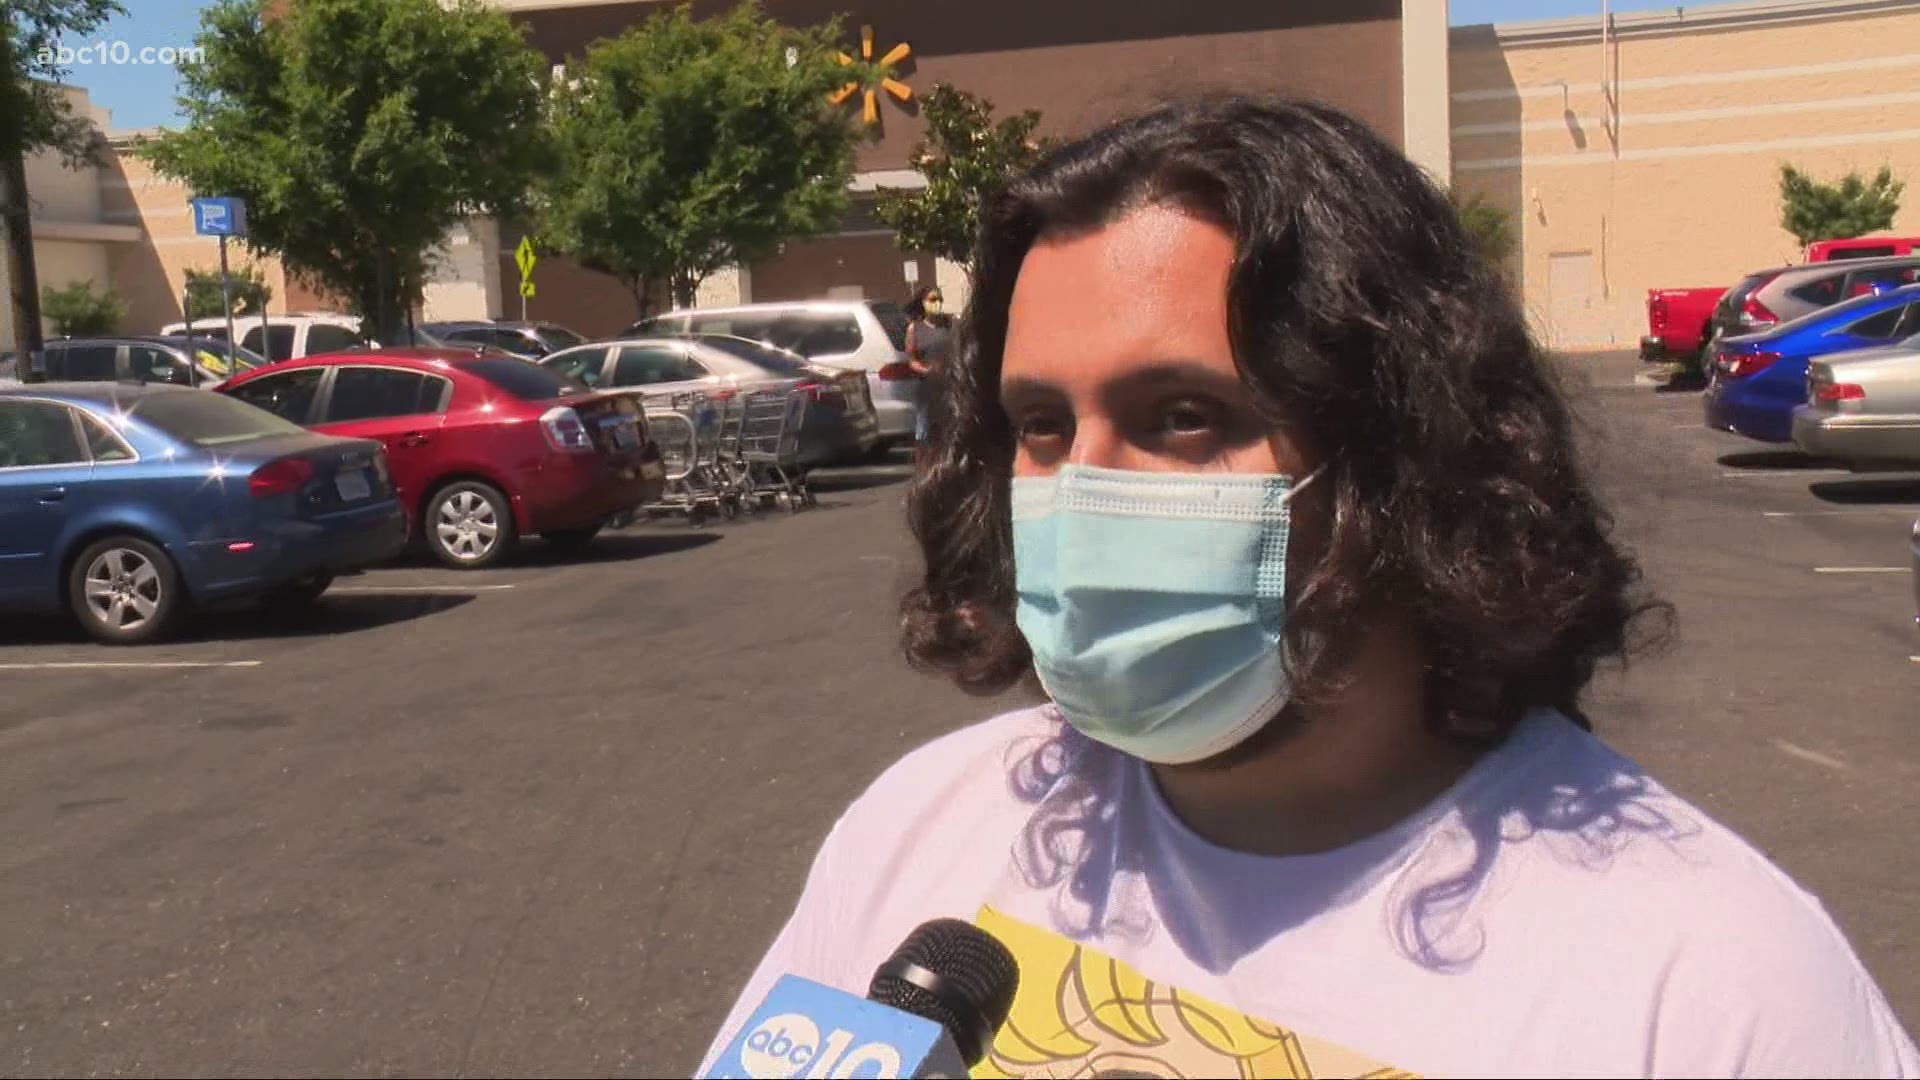 Local shoppers talk about taking the masks off on June 15.